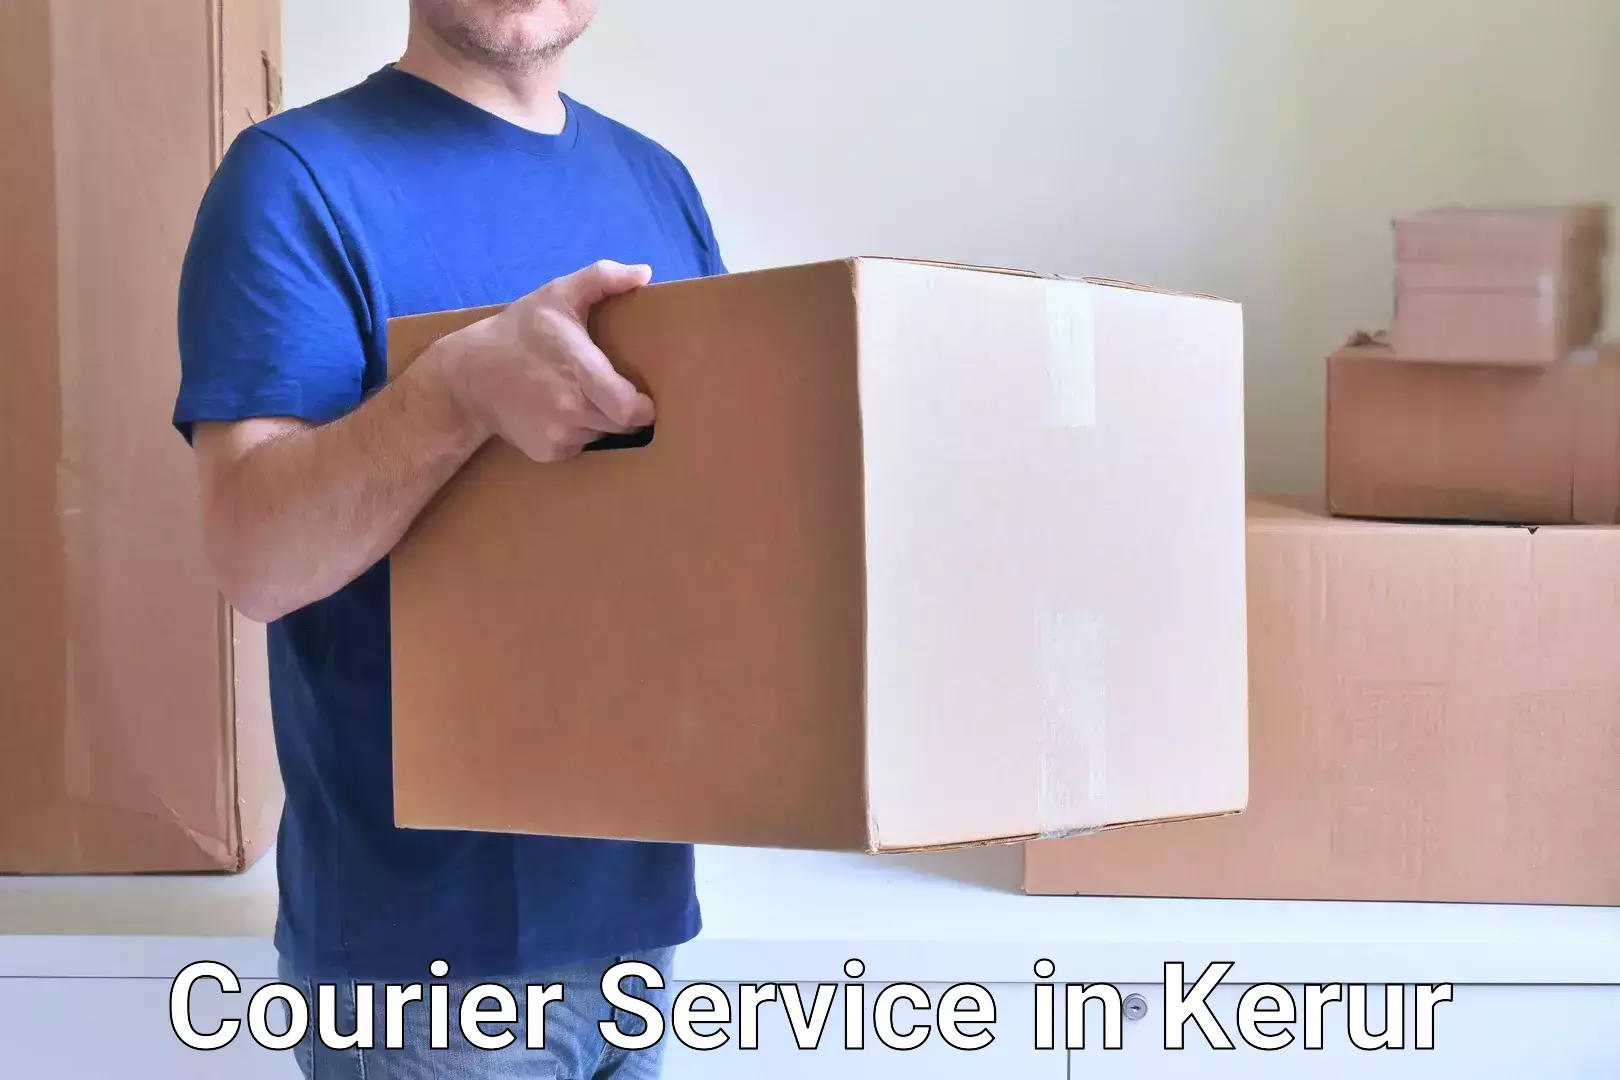 On-call courier service in Kerur